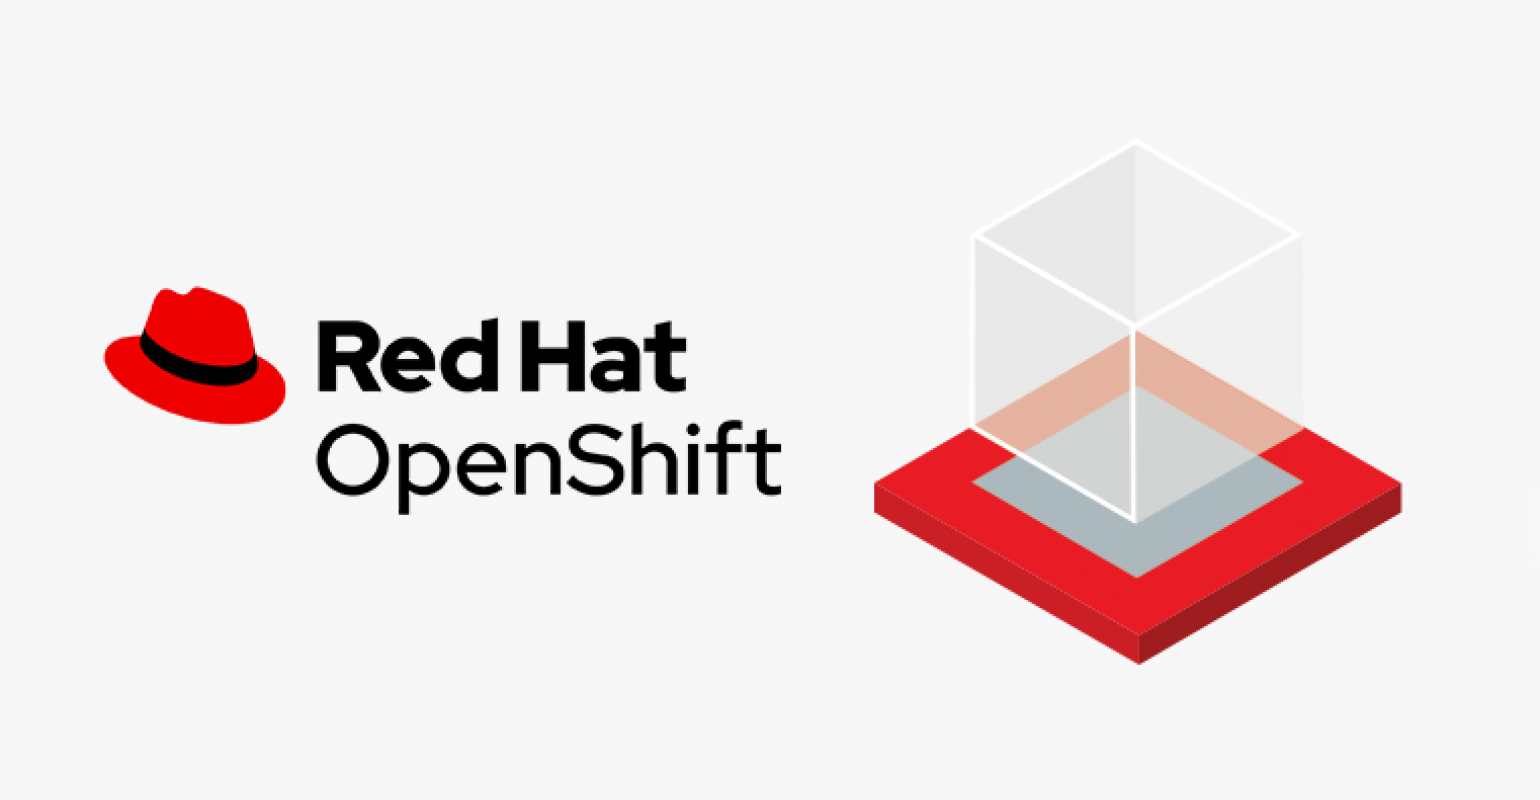 Adapting Docker and Kubernetes containers to run on Red Hat